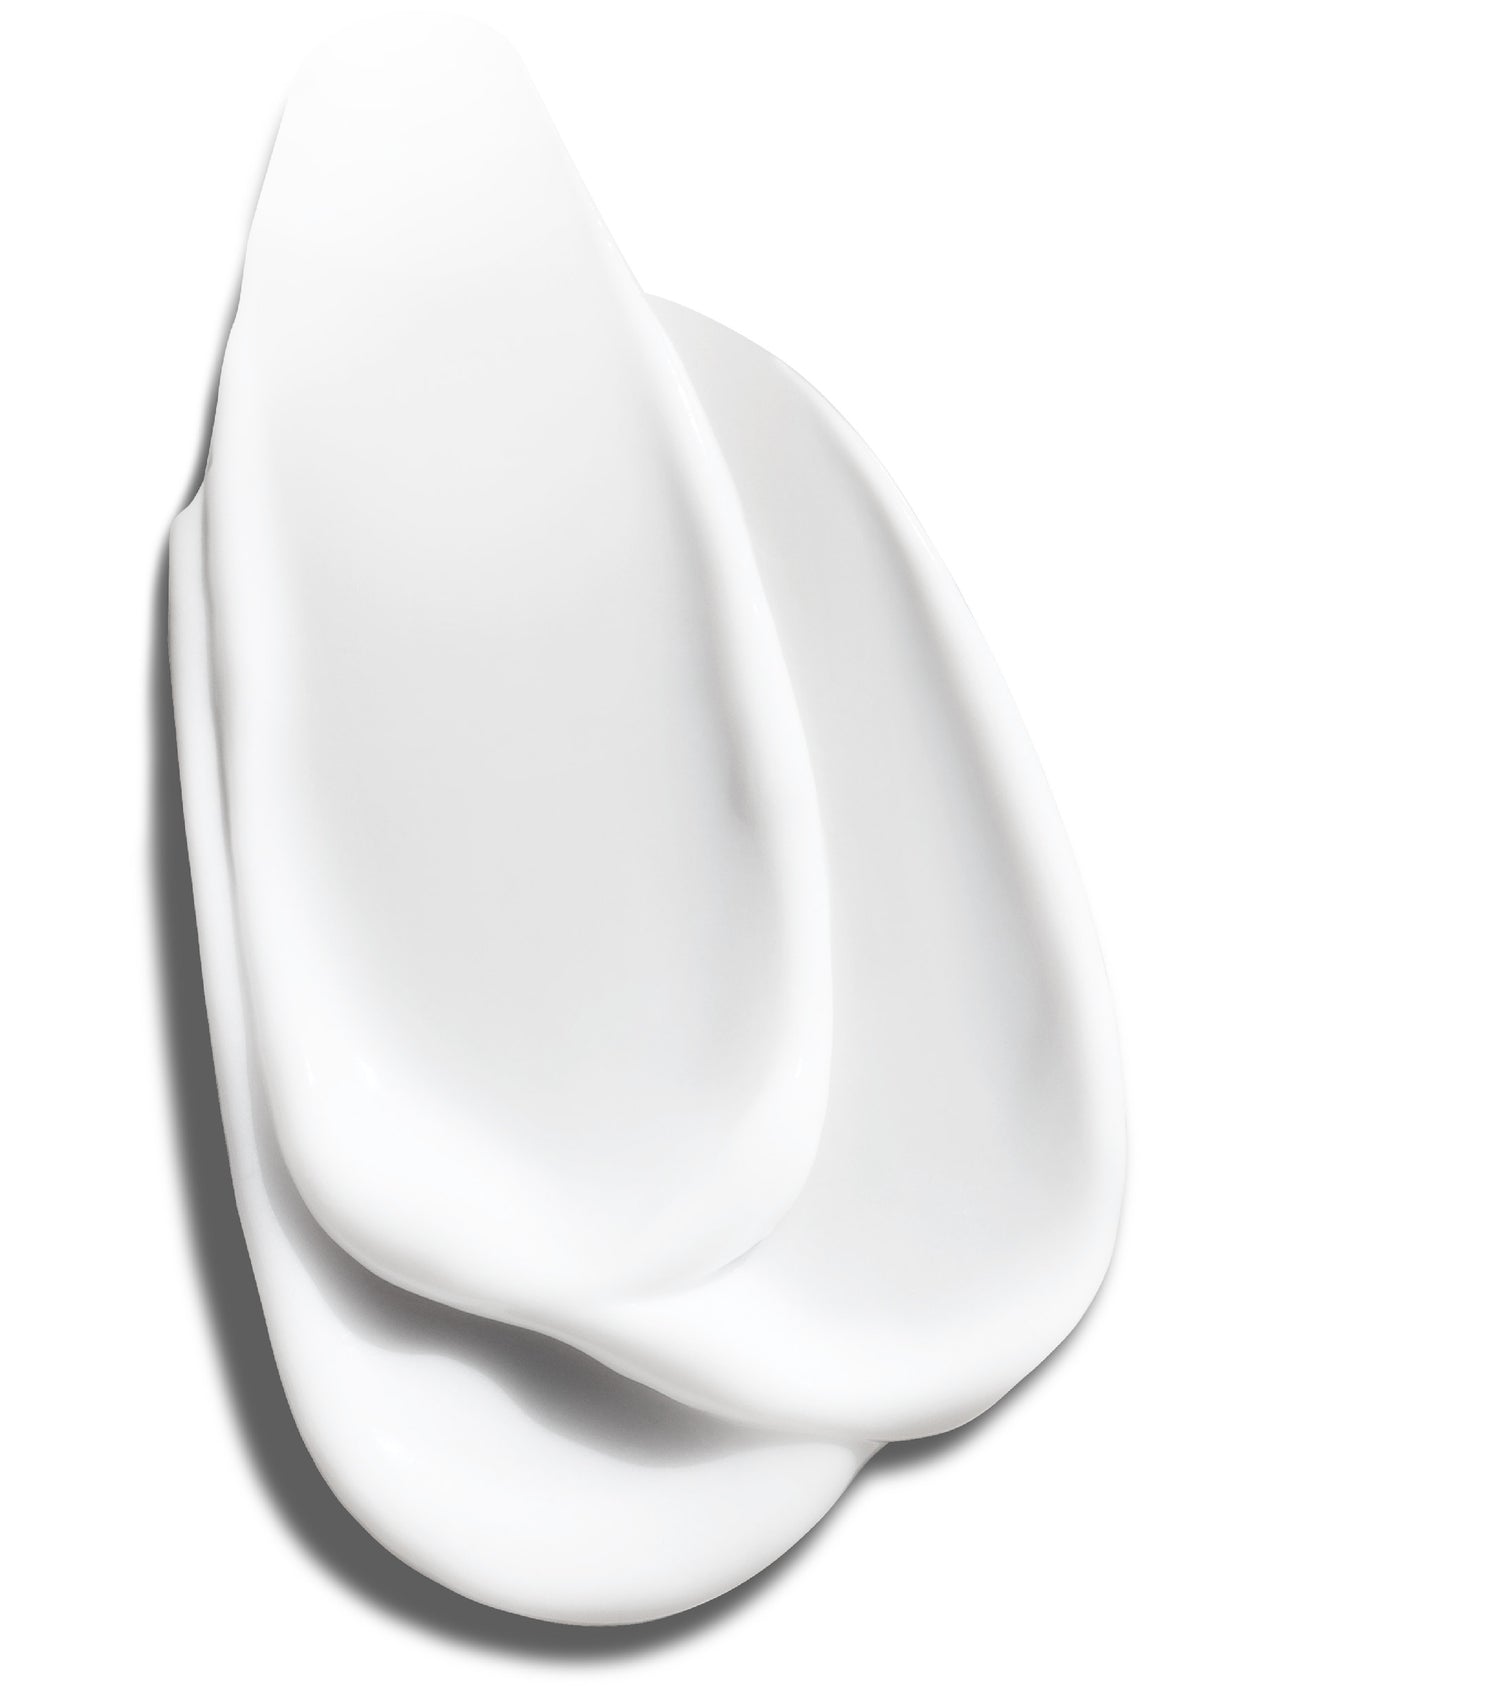 A dollop of white RESET Acne Gel Treatment product on a white background